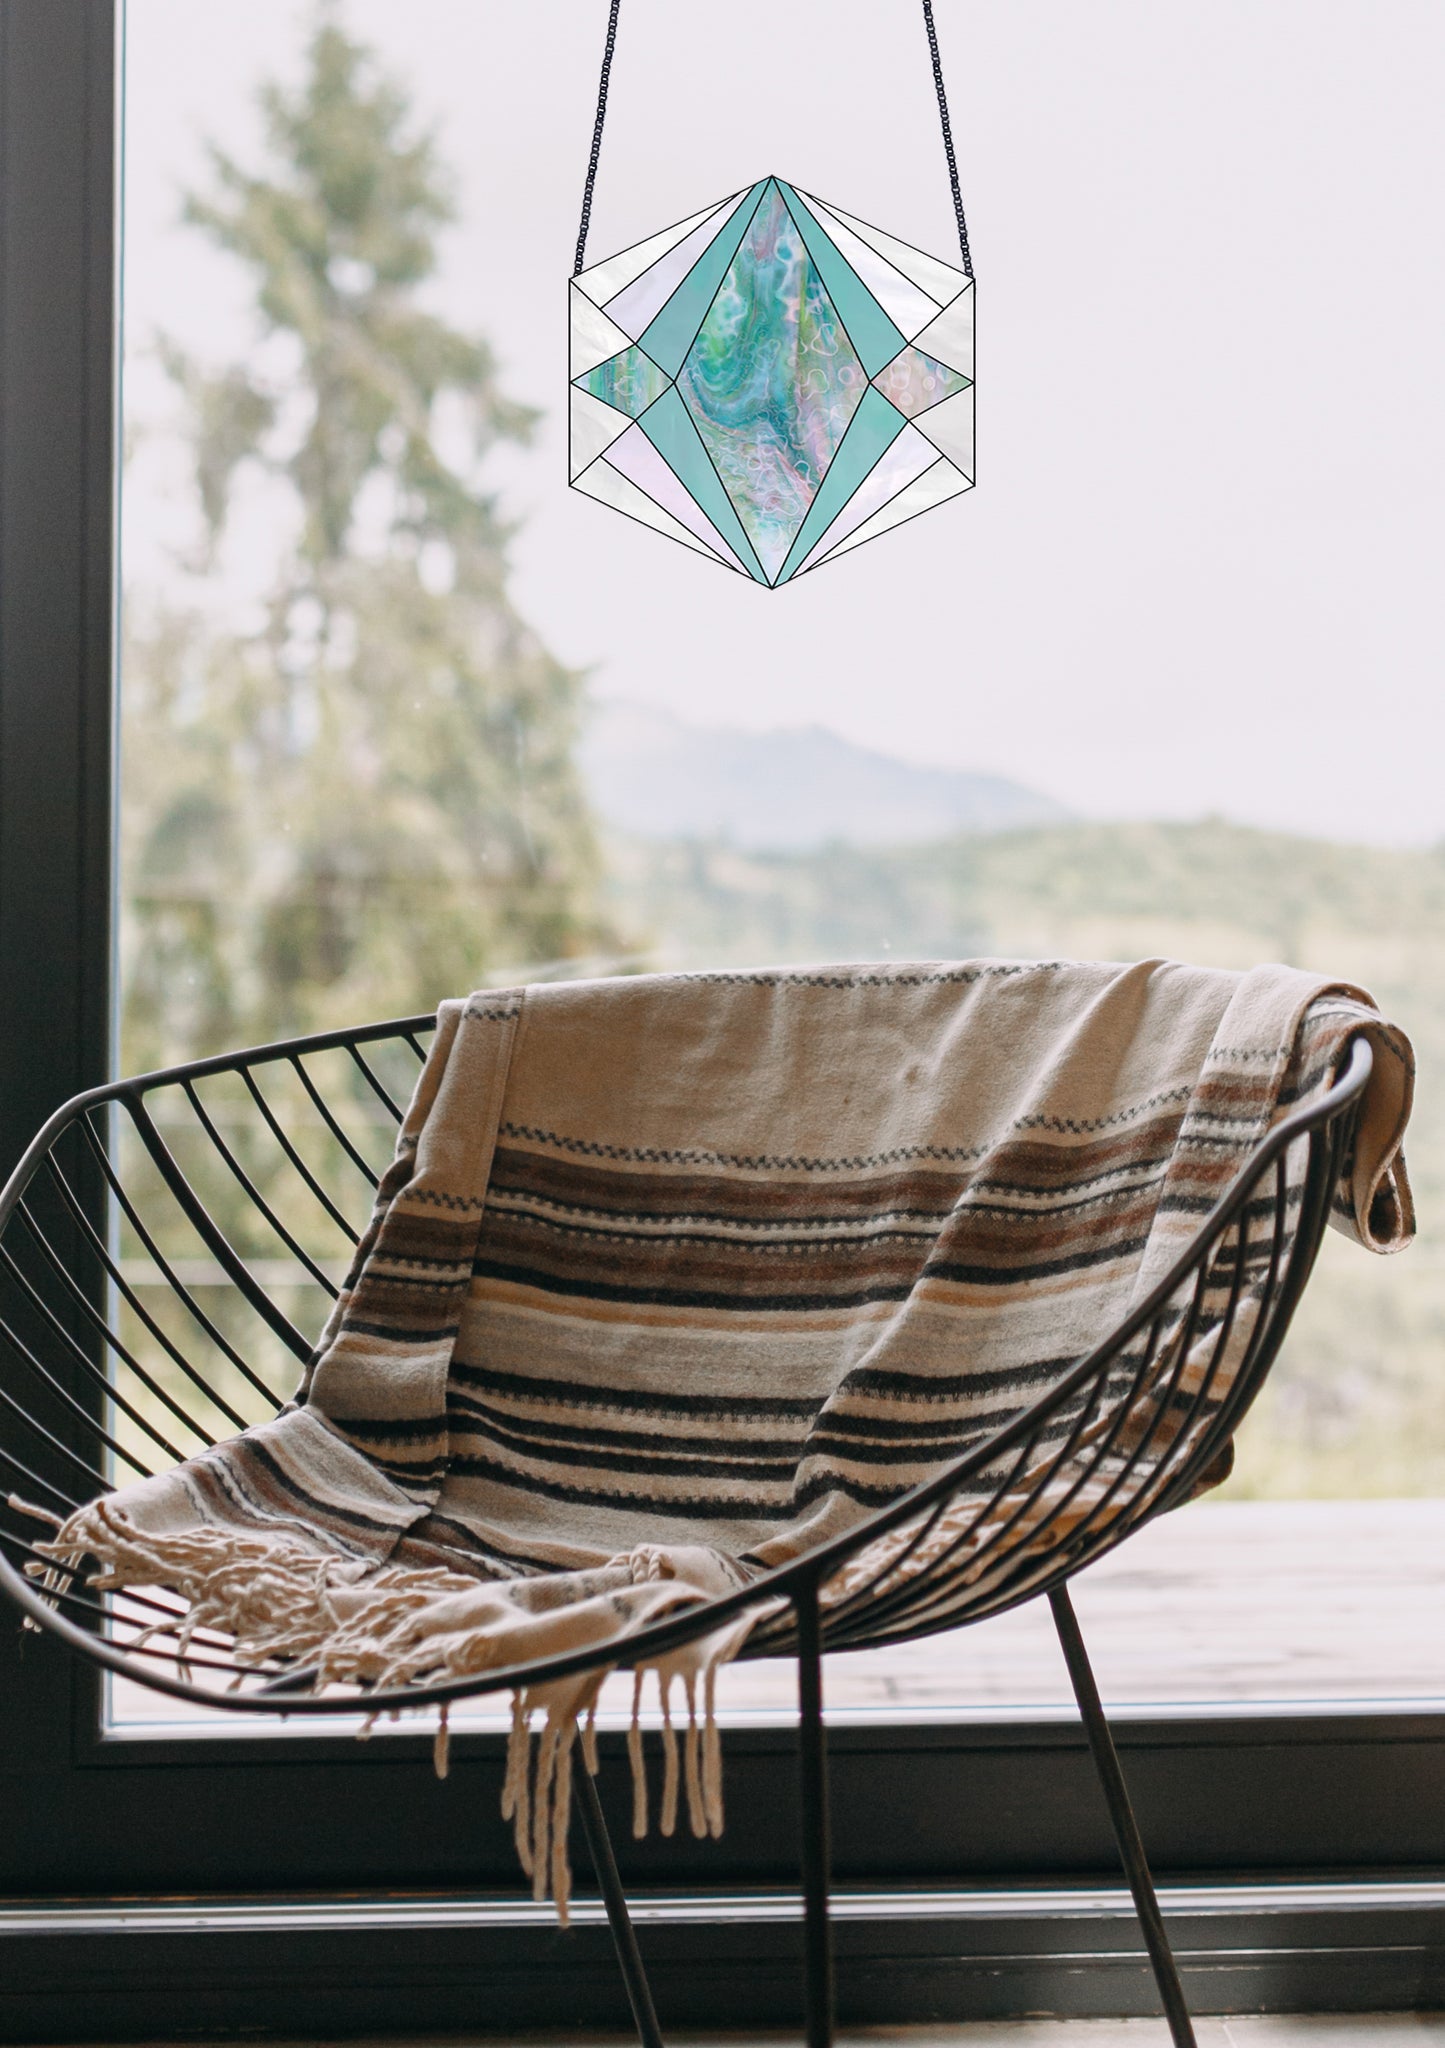 Beginner stained glass pattern for a boho geometric hexagon, instant PDF download, hanging in a window with a chair